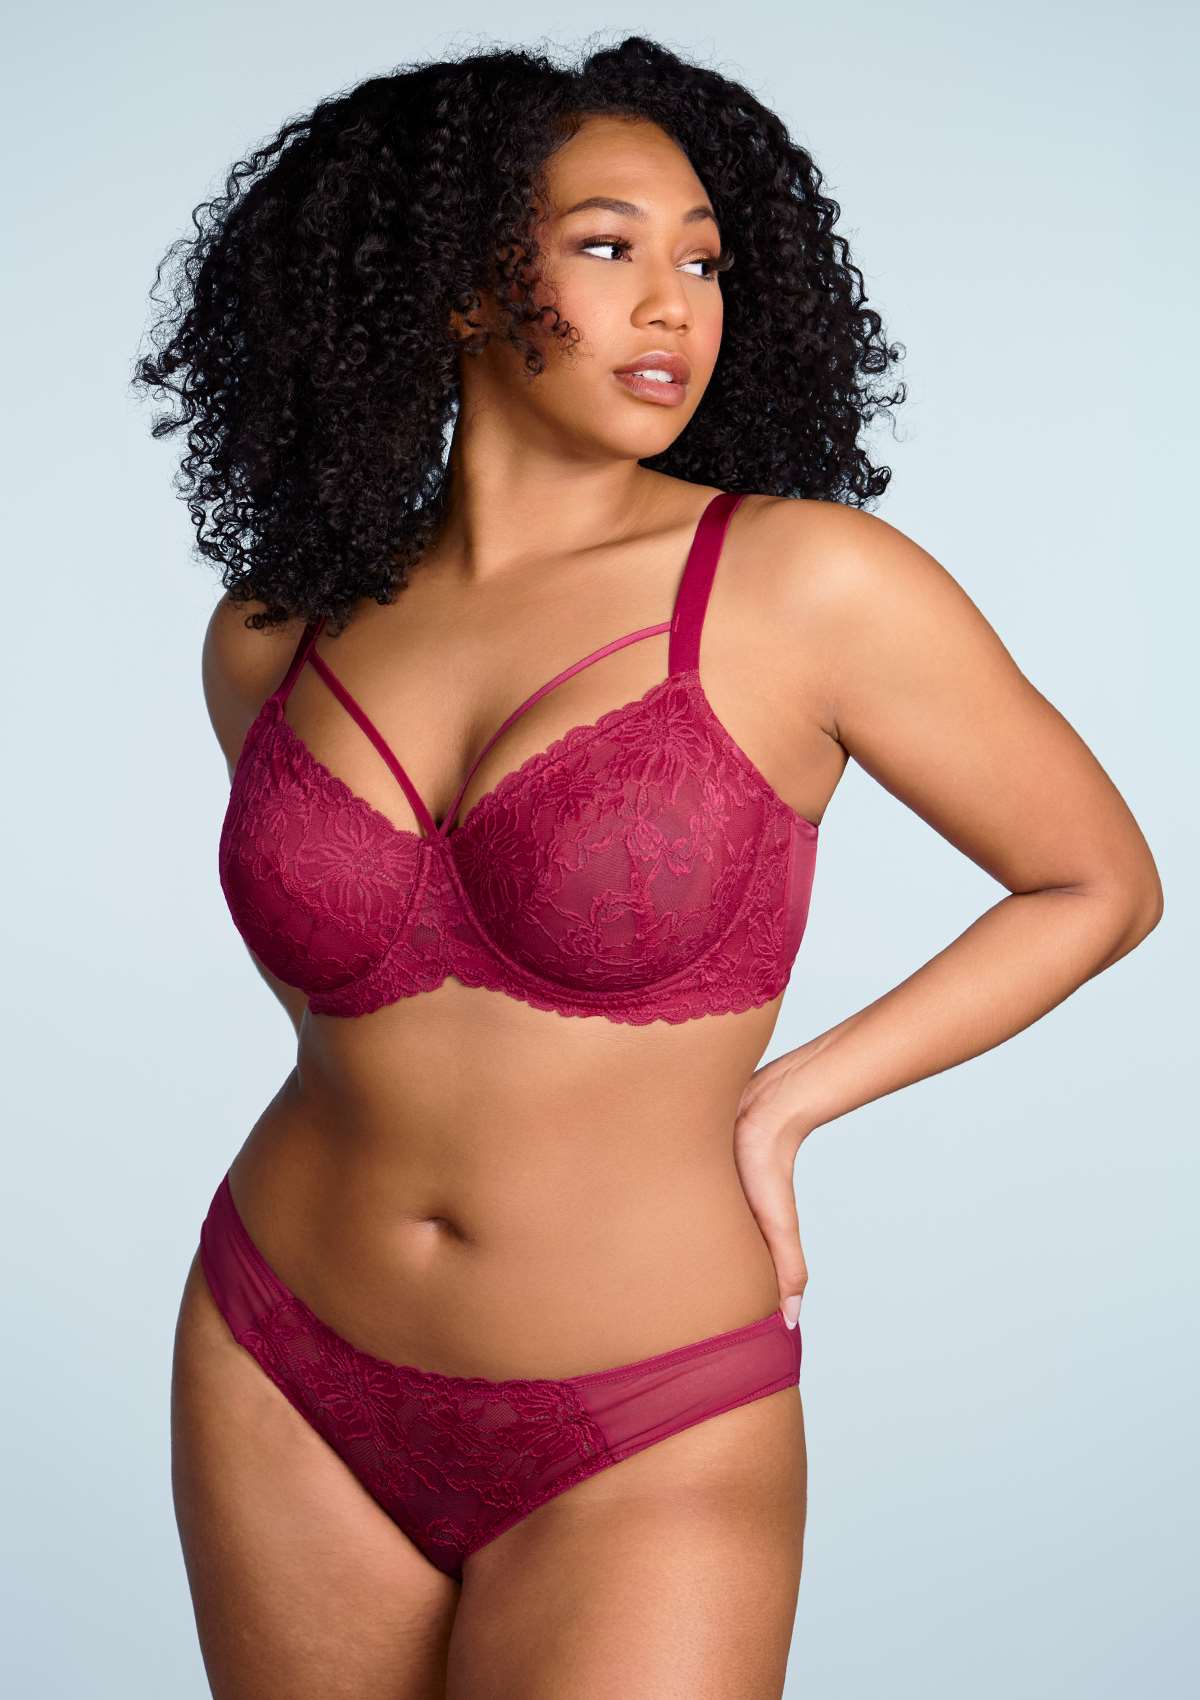 HSIA Pretty In Petals Lace Panties And Bra Set: Plus Size Women Bra - Red / 32 / DDD/F